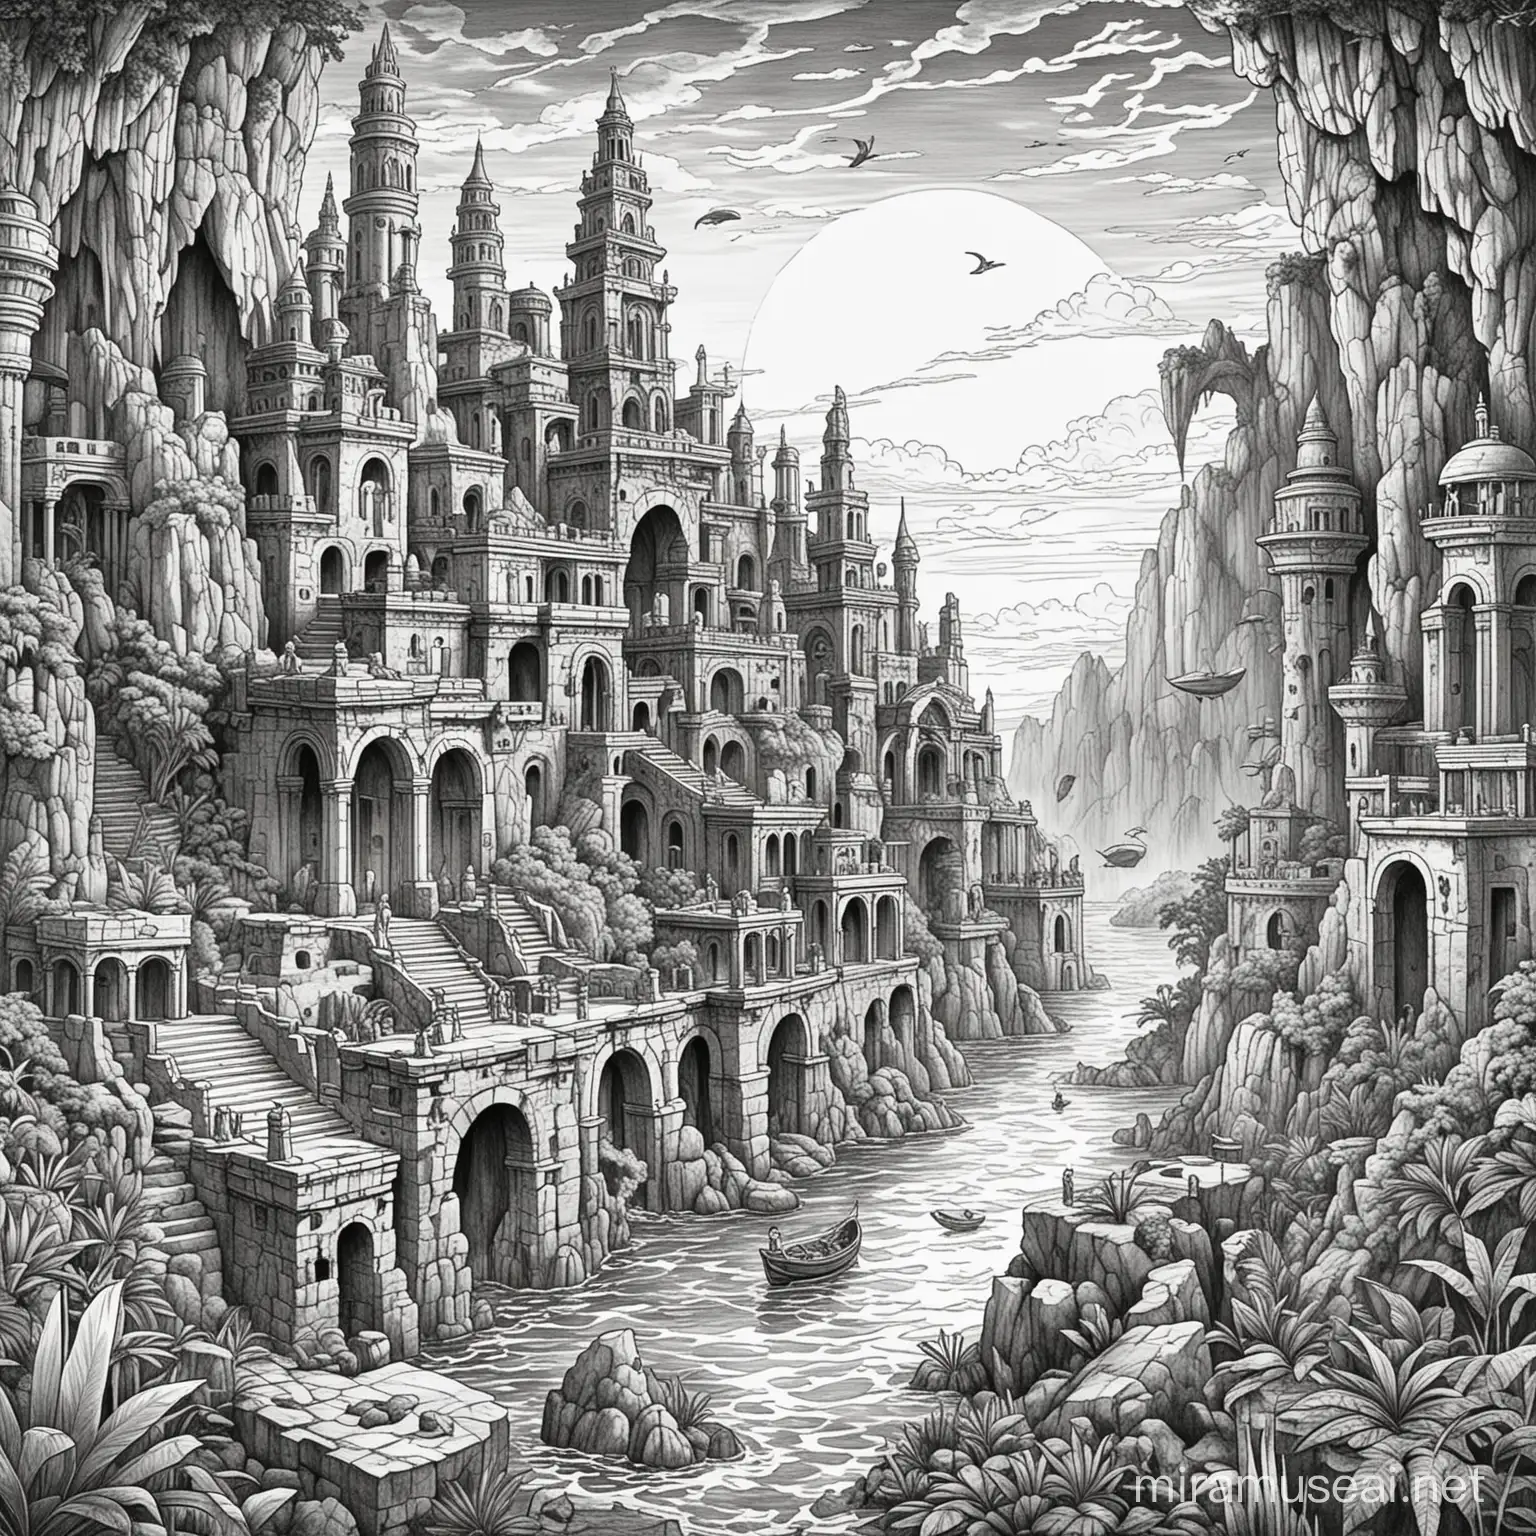 Coloring Page of the Enigmatic Lost City of Atlantis